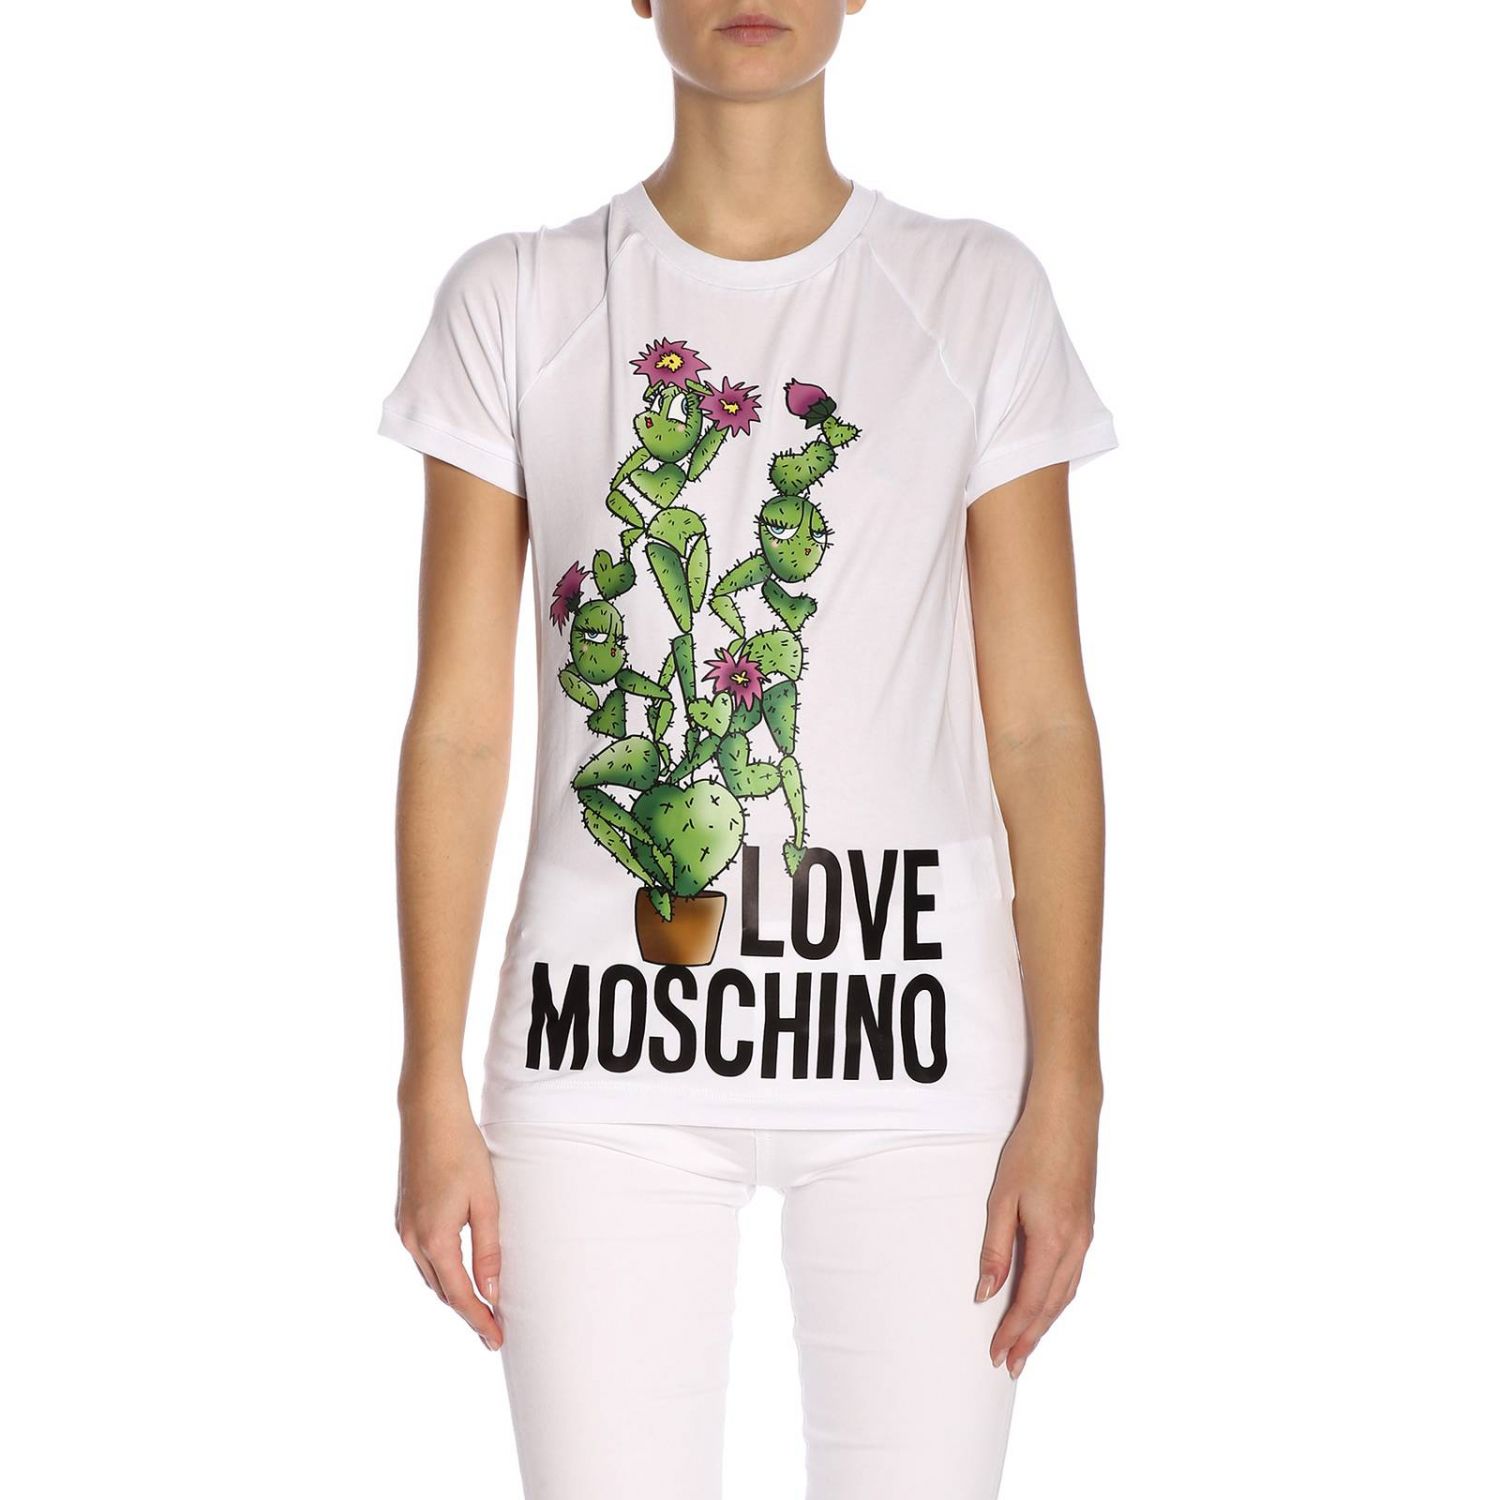 Love Moschino Outlet: t-shirt for woman - White | Love Moschino t-shirt ...